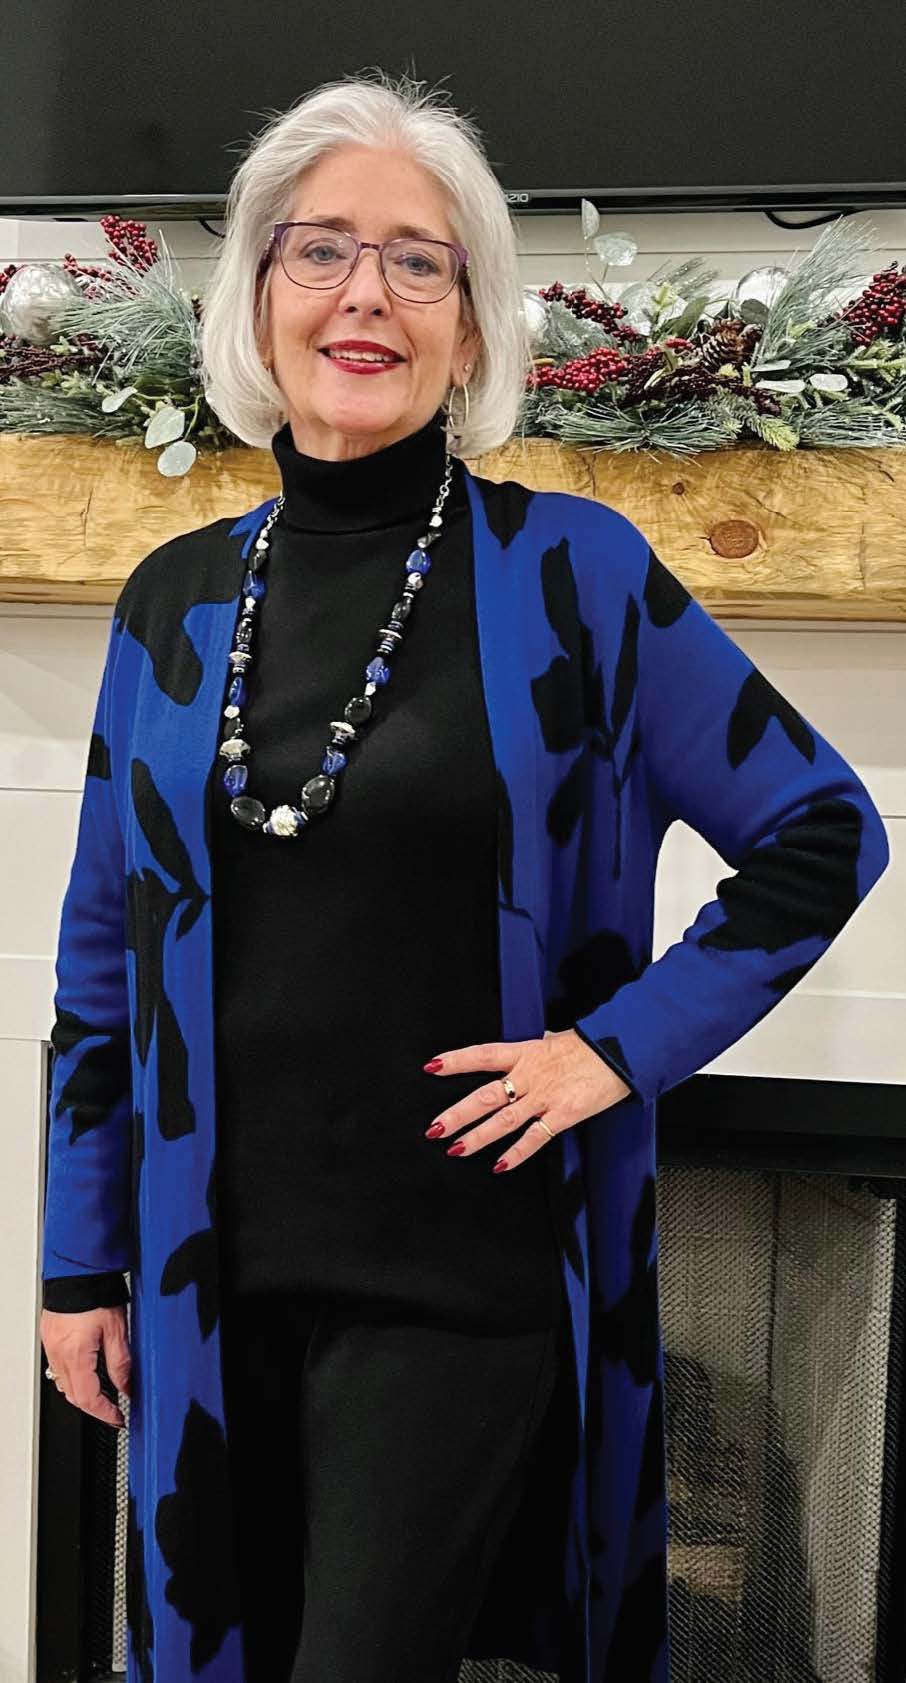 Suzanne Carlyle after surgery wearing blue sweater and black pants.